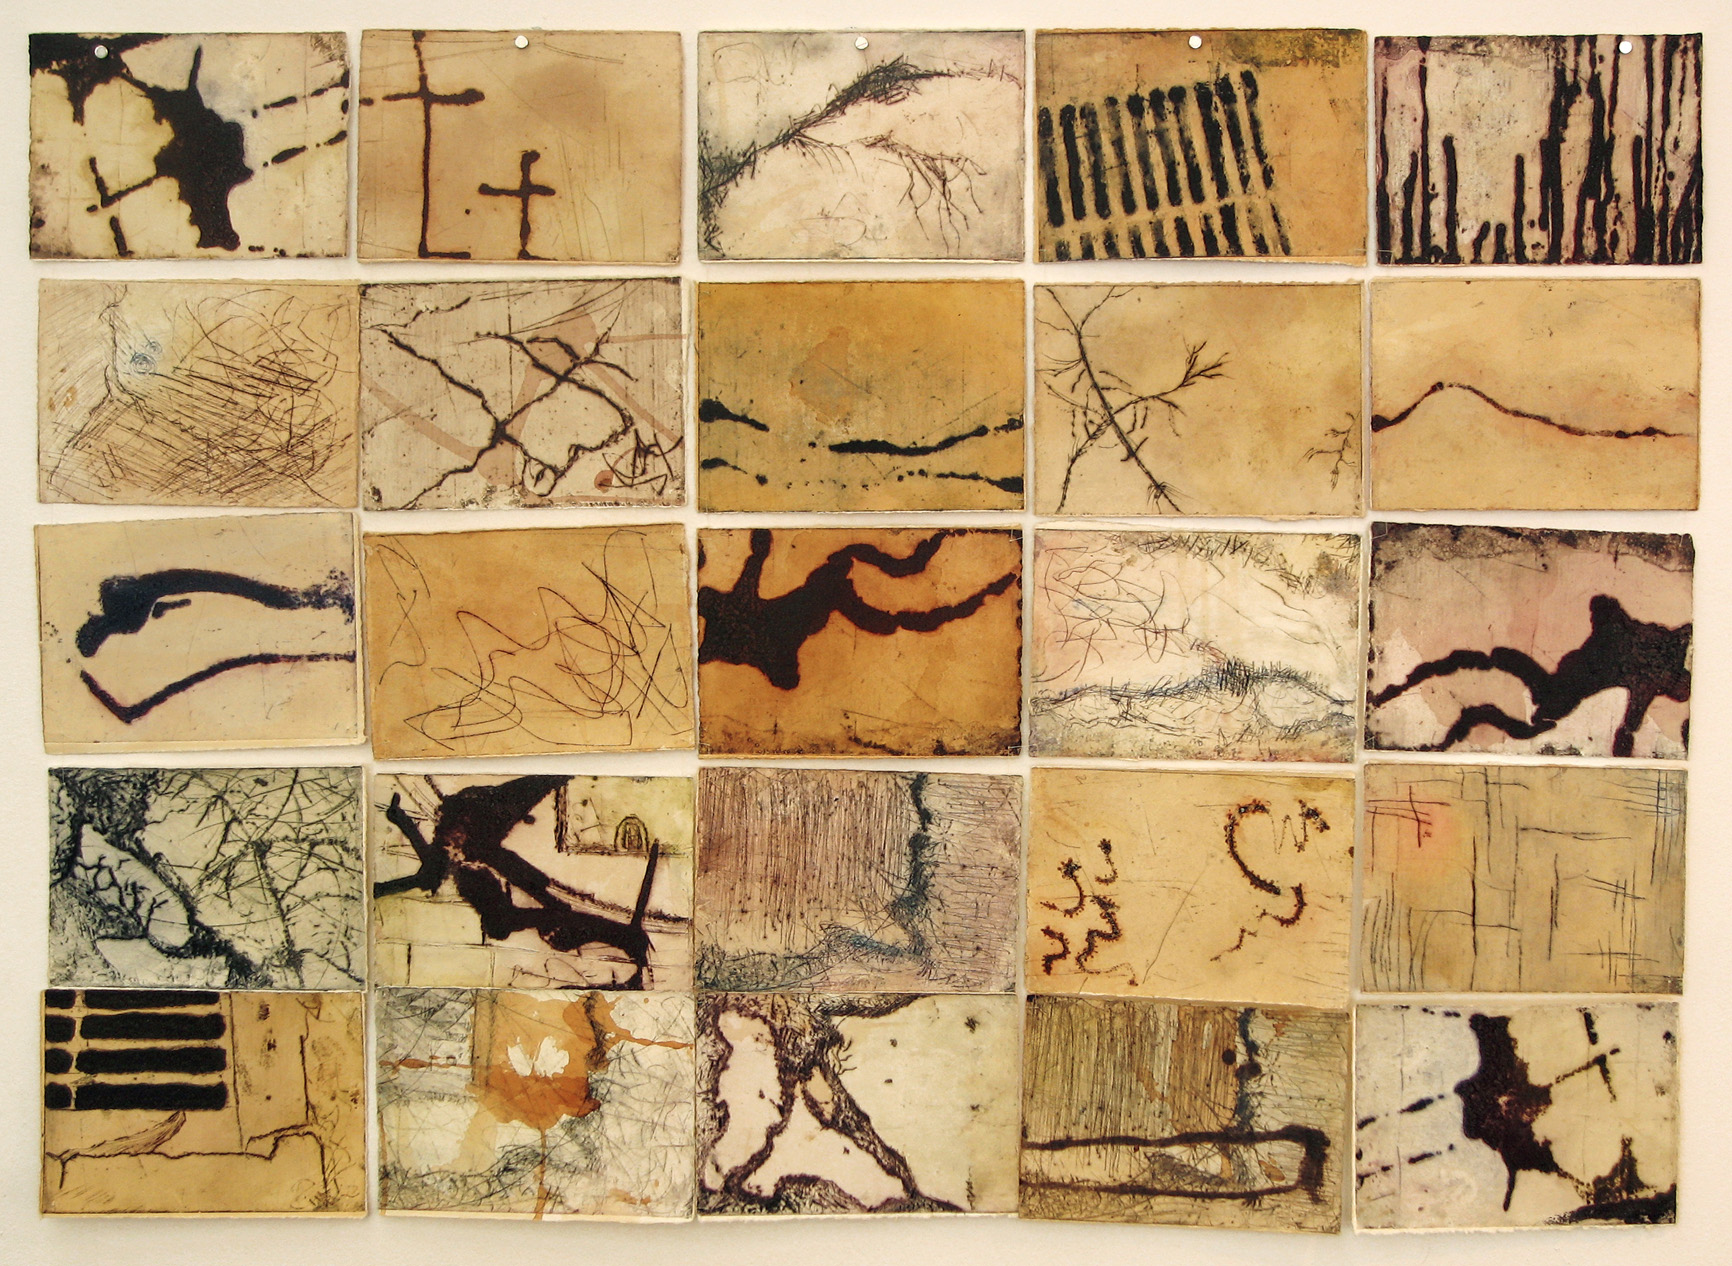 Crazed: 25 images sewn together based on cracks and marks in the road